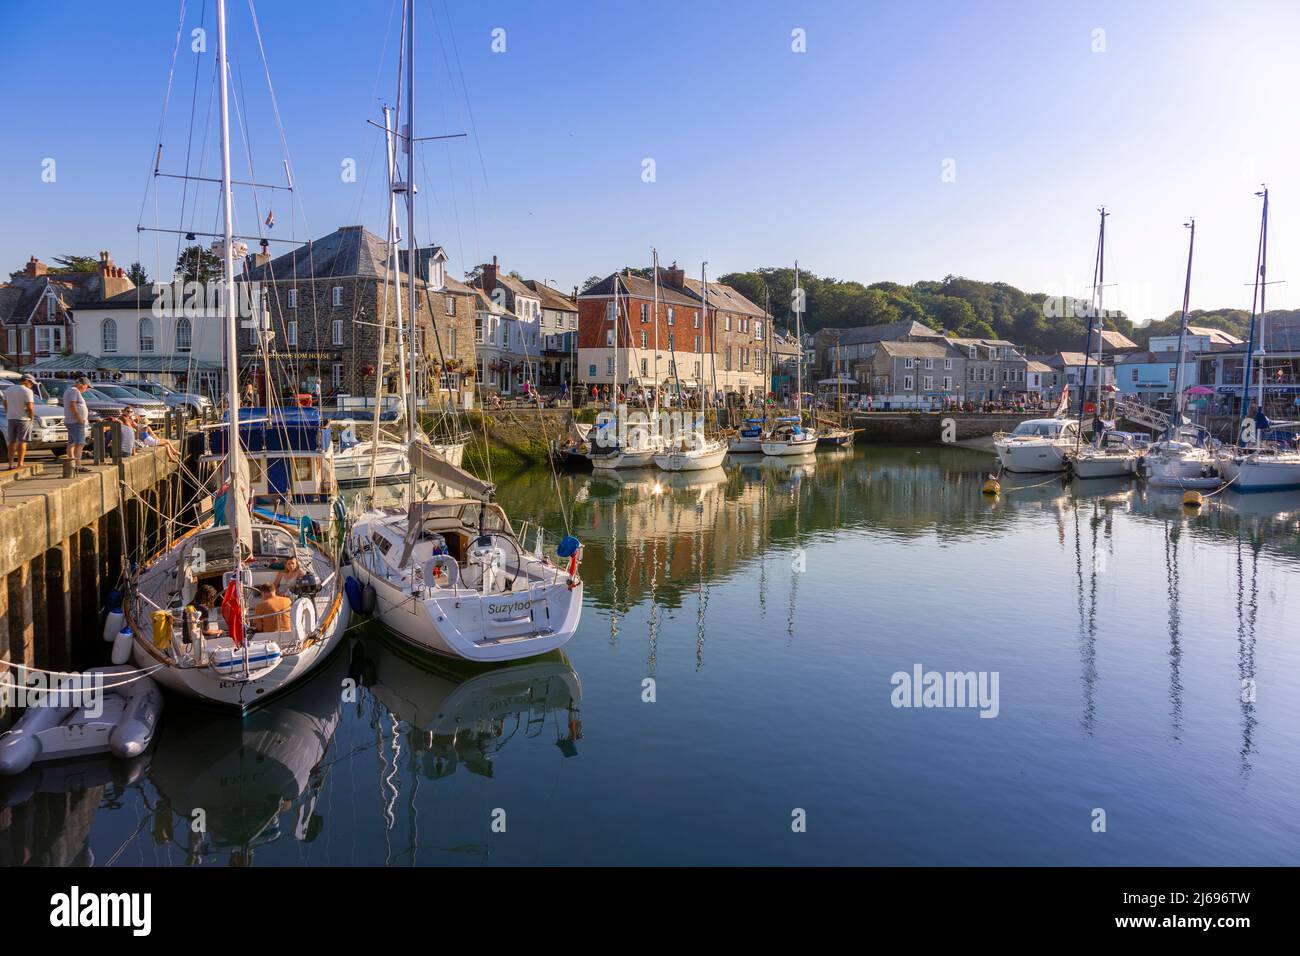 Bateaux et port, Padstow, Cornwall, Angleterre, Royaume-Uni, Europe Banque D'Images